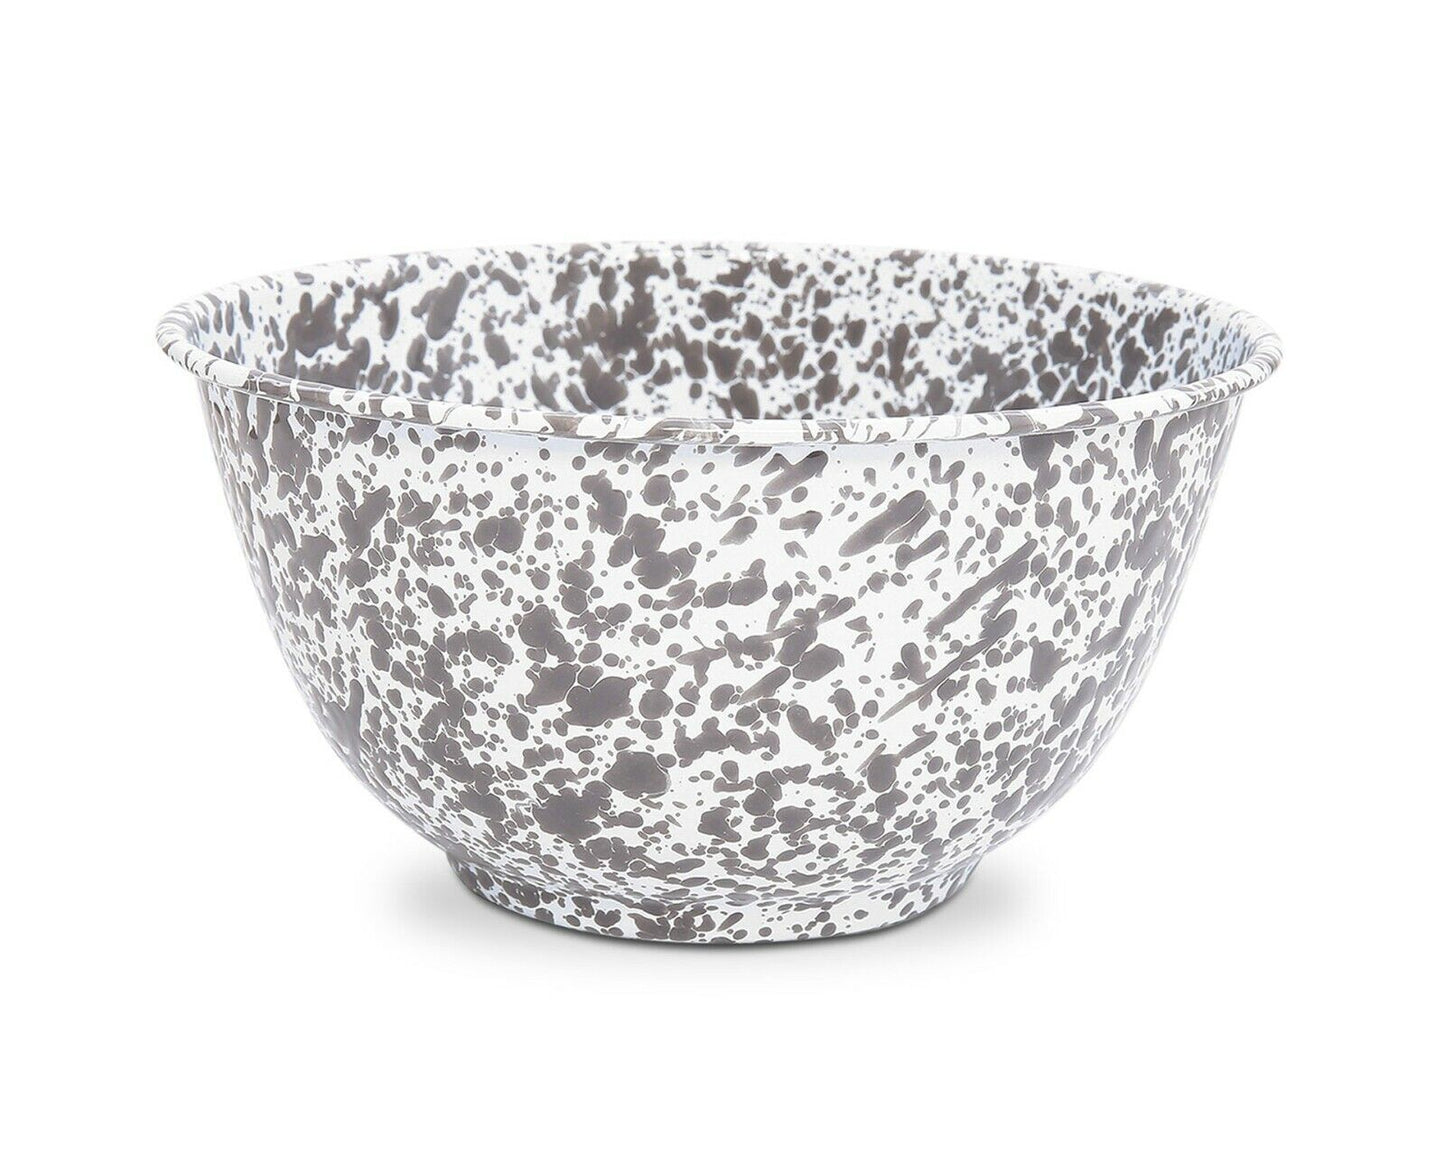 large gray serving bowl on a white background